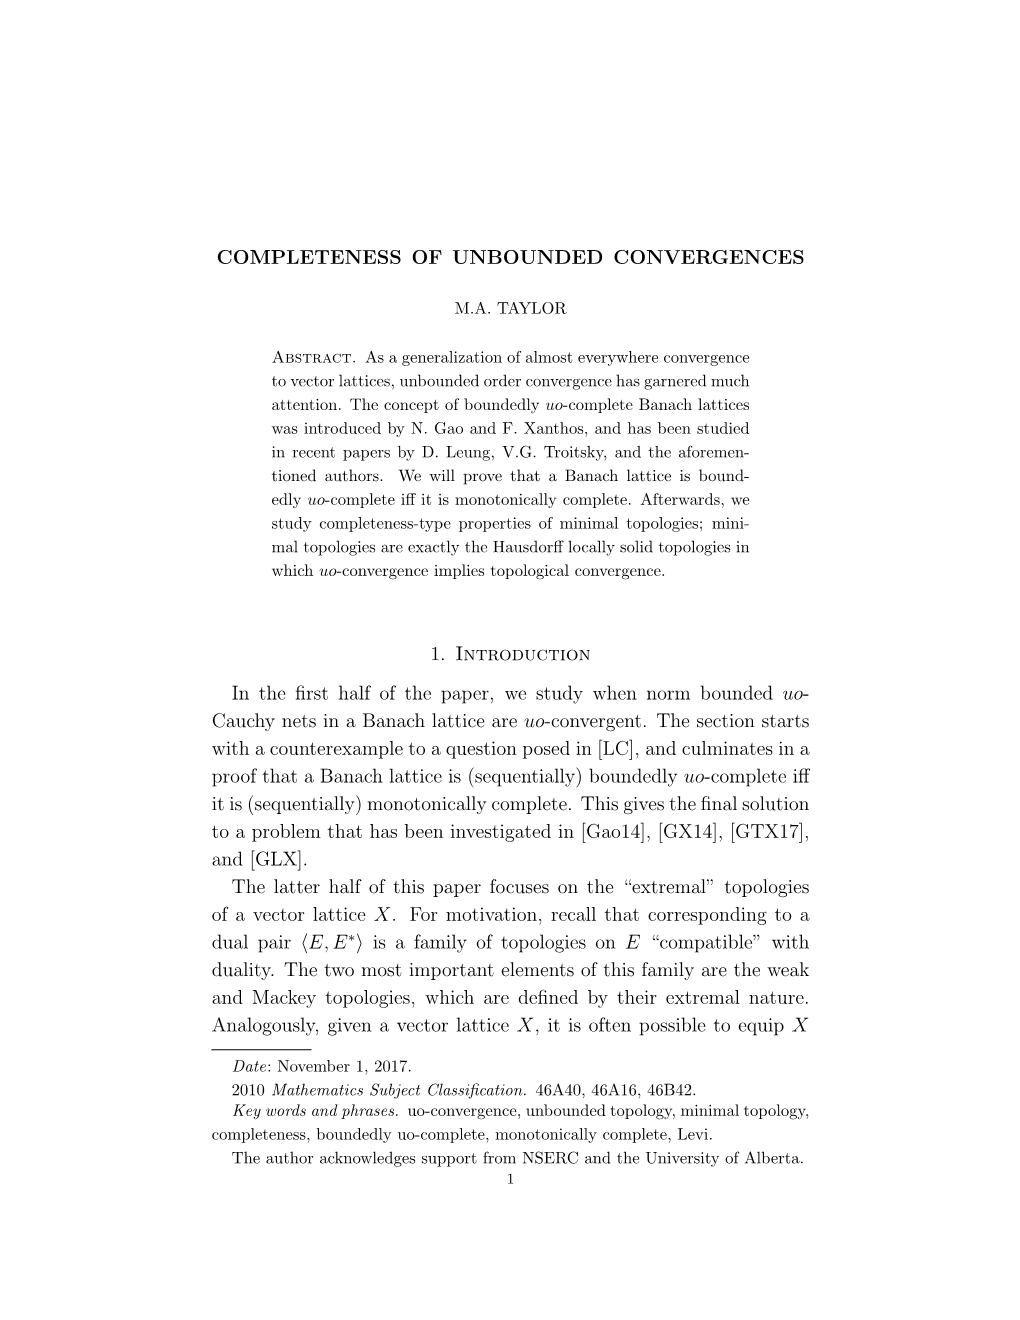 Completeness of Unbounded Convergences